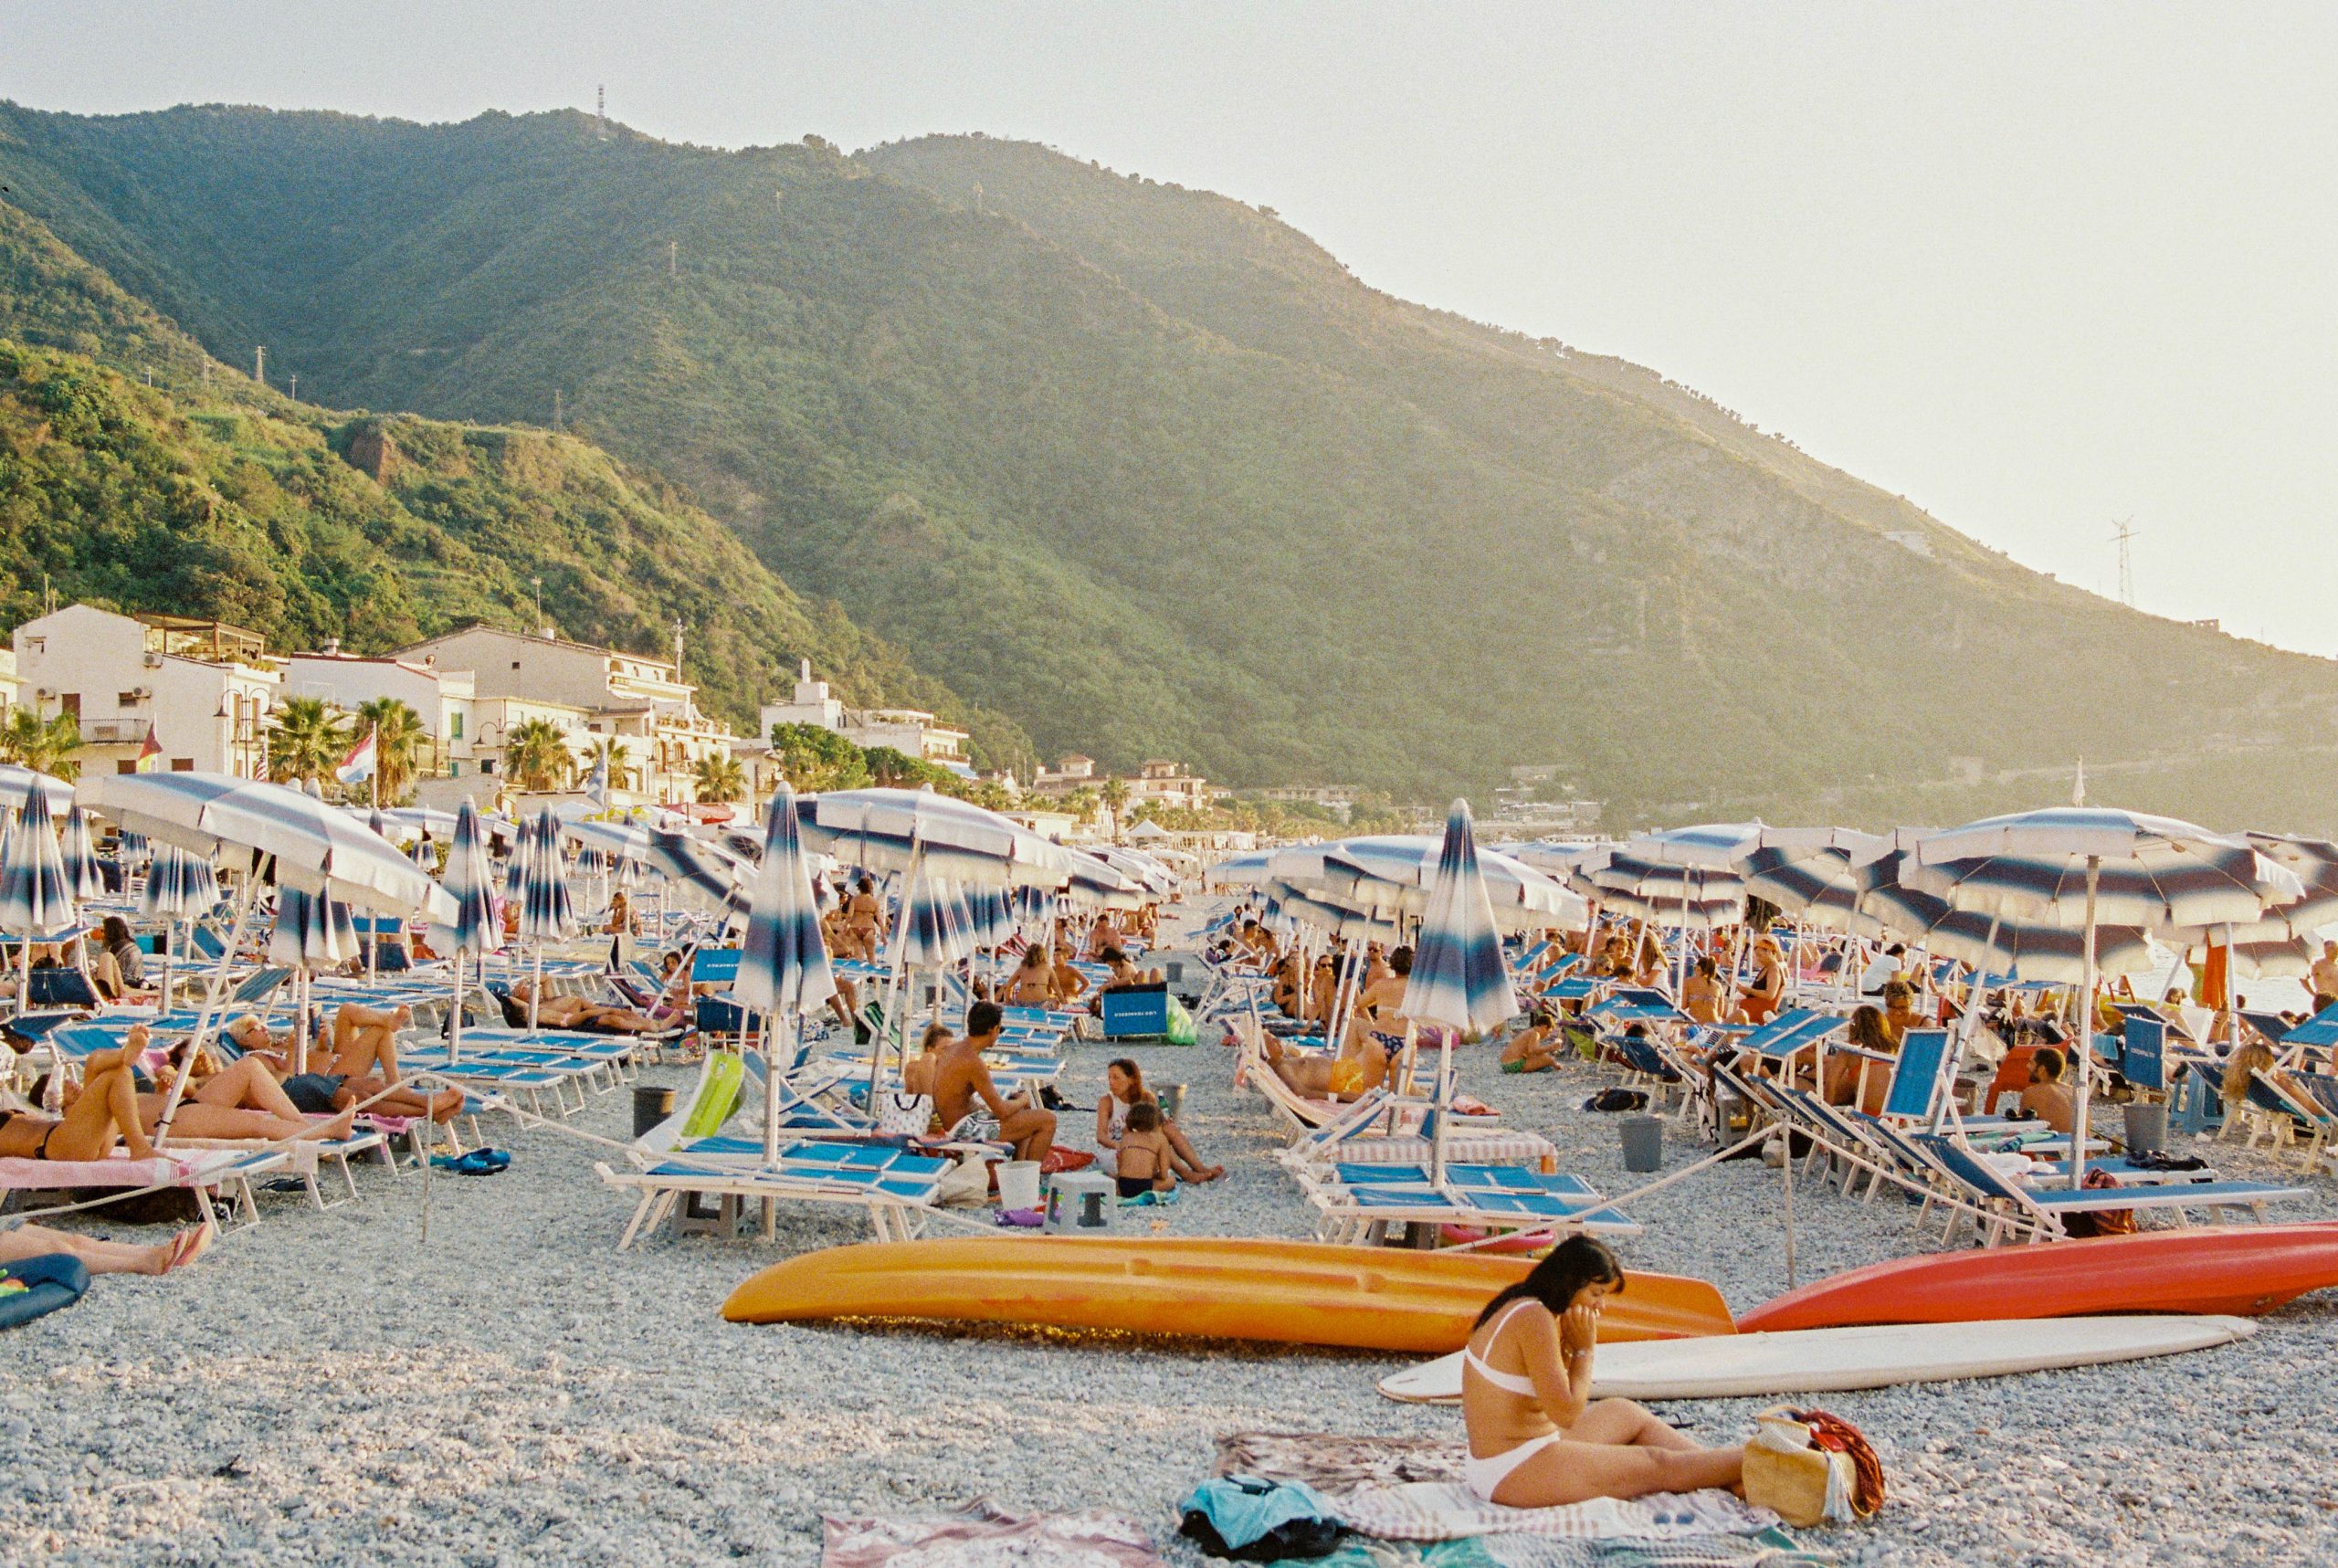 A 35mm film photo taken at Scilla Beach, in Calabria. In the foreground, a woman sits on her towel in white swimwear, behind her are endless rows of blue & white umbrellas, and behind that the a green hill covered in a golden haze from the sunset & salty water.